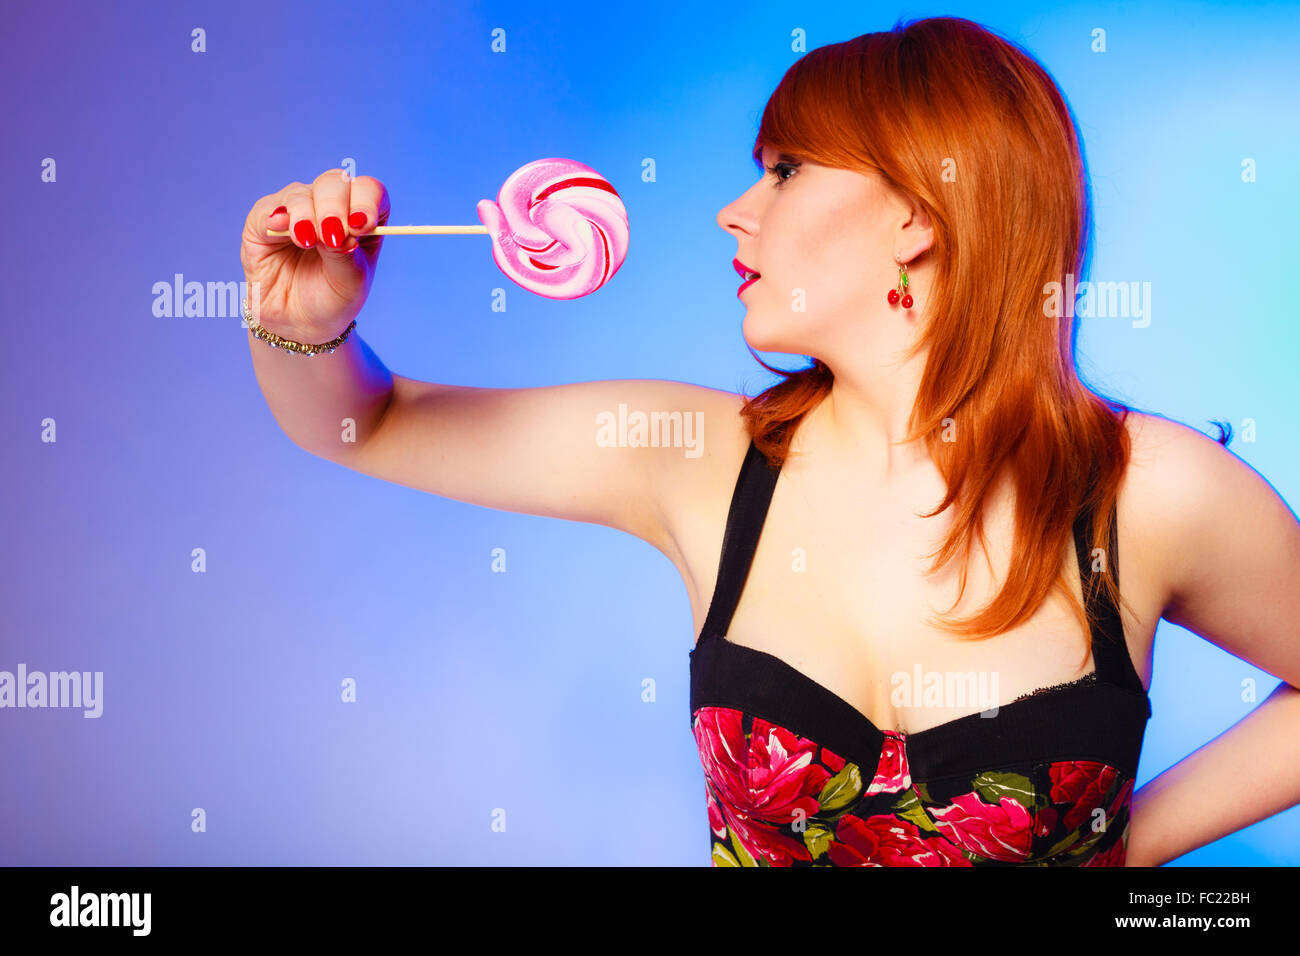 Woman with sweet candy lollipop in hand. Stock Photo